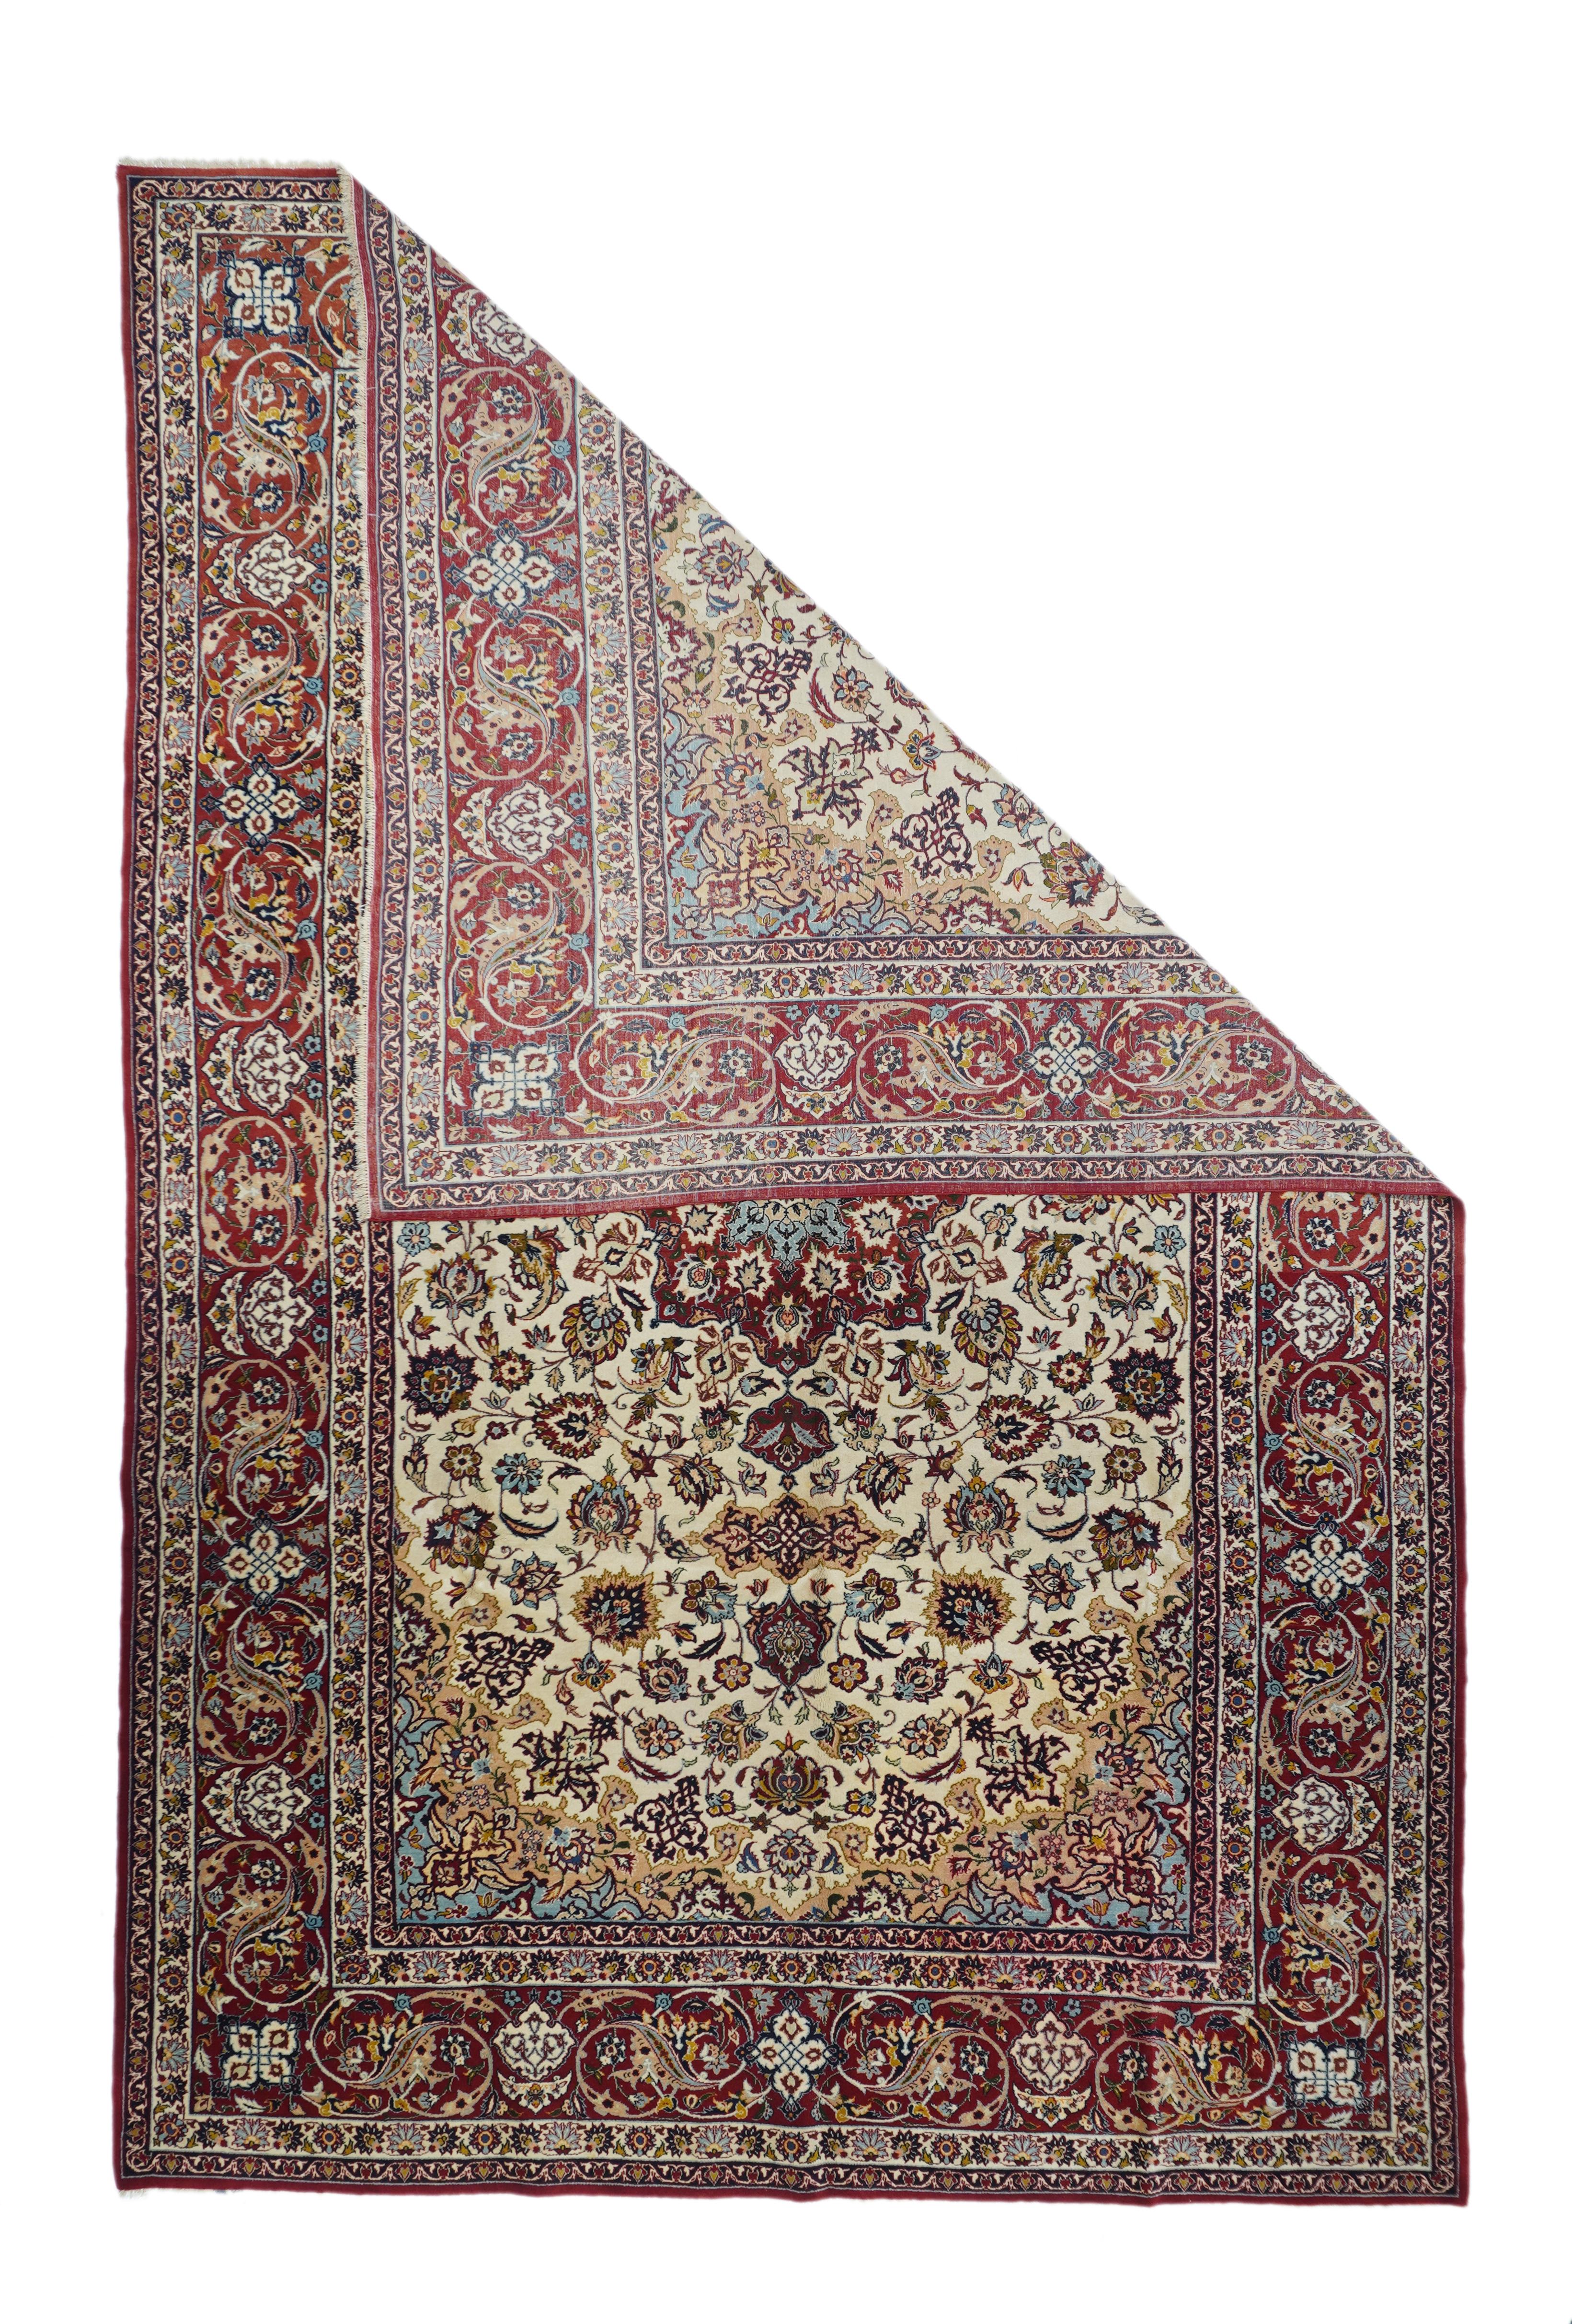 Ivory fields are an Isfahan staple and this very finely woven, cotton foundation, does not disappoint with its red palmette octogramme medallion with a sky blue sub-medallion; with a souble escutcheon and cartouche pendant system, and with